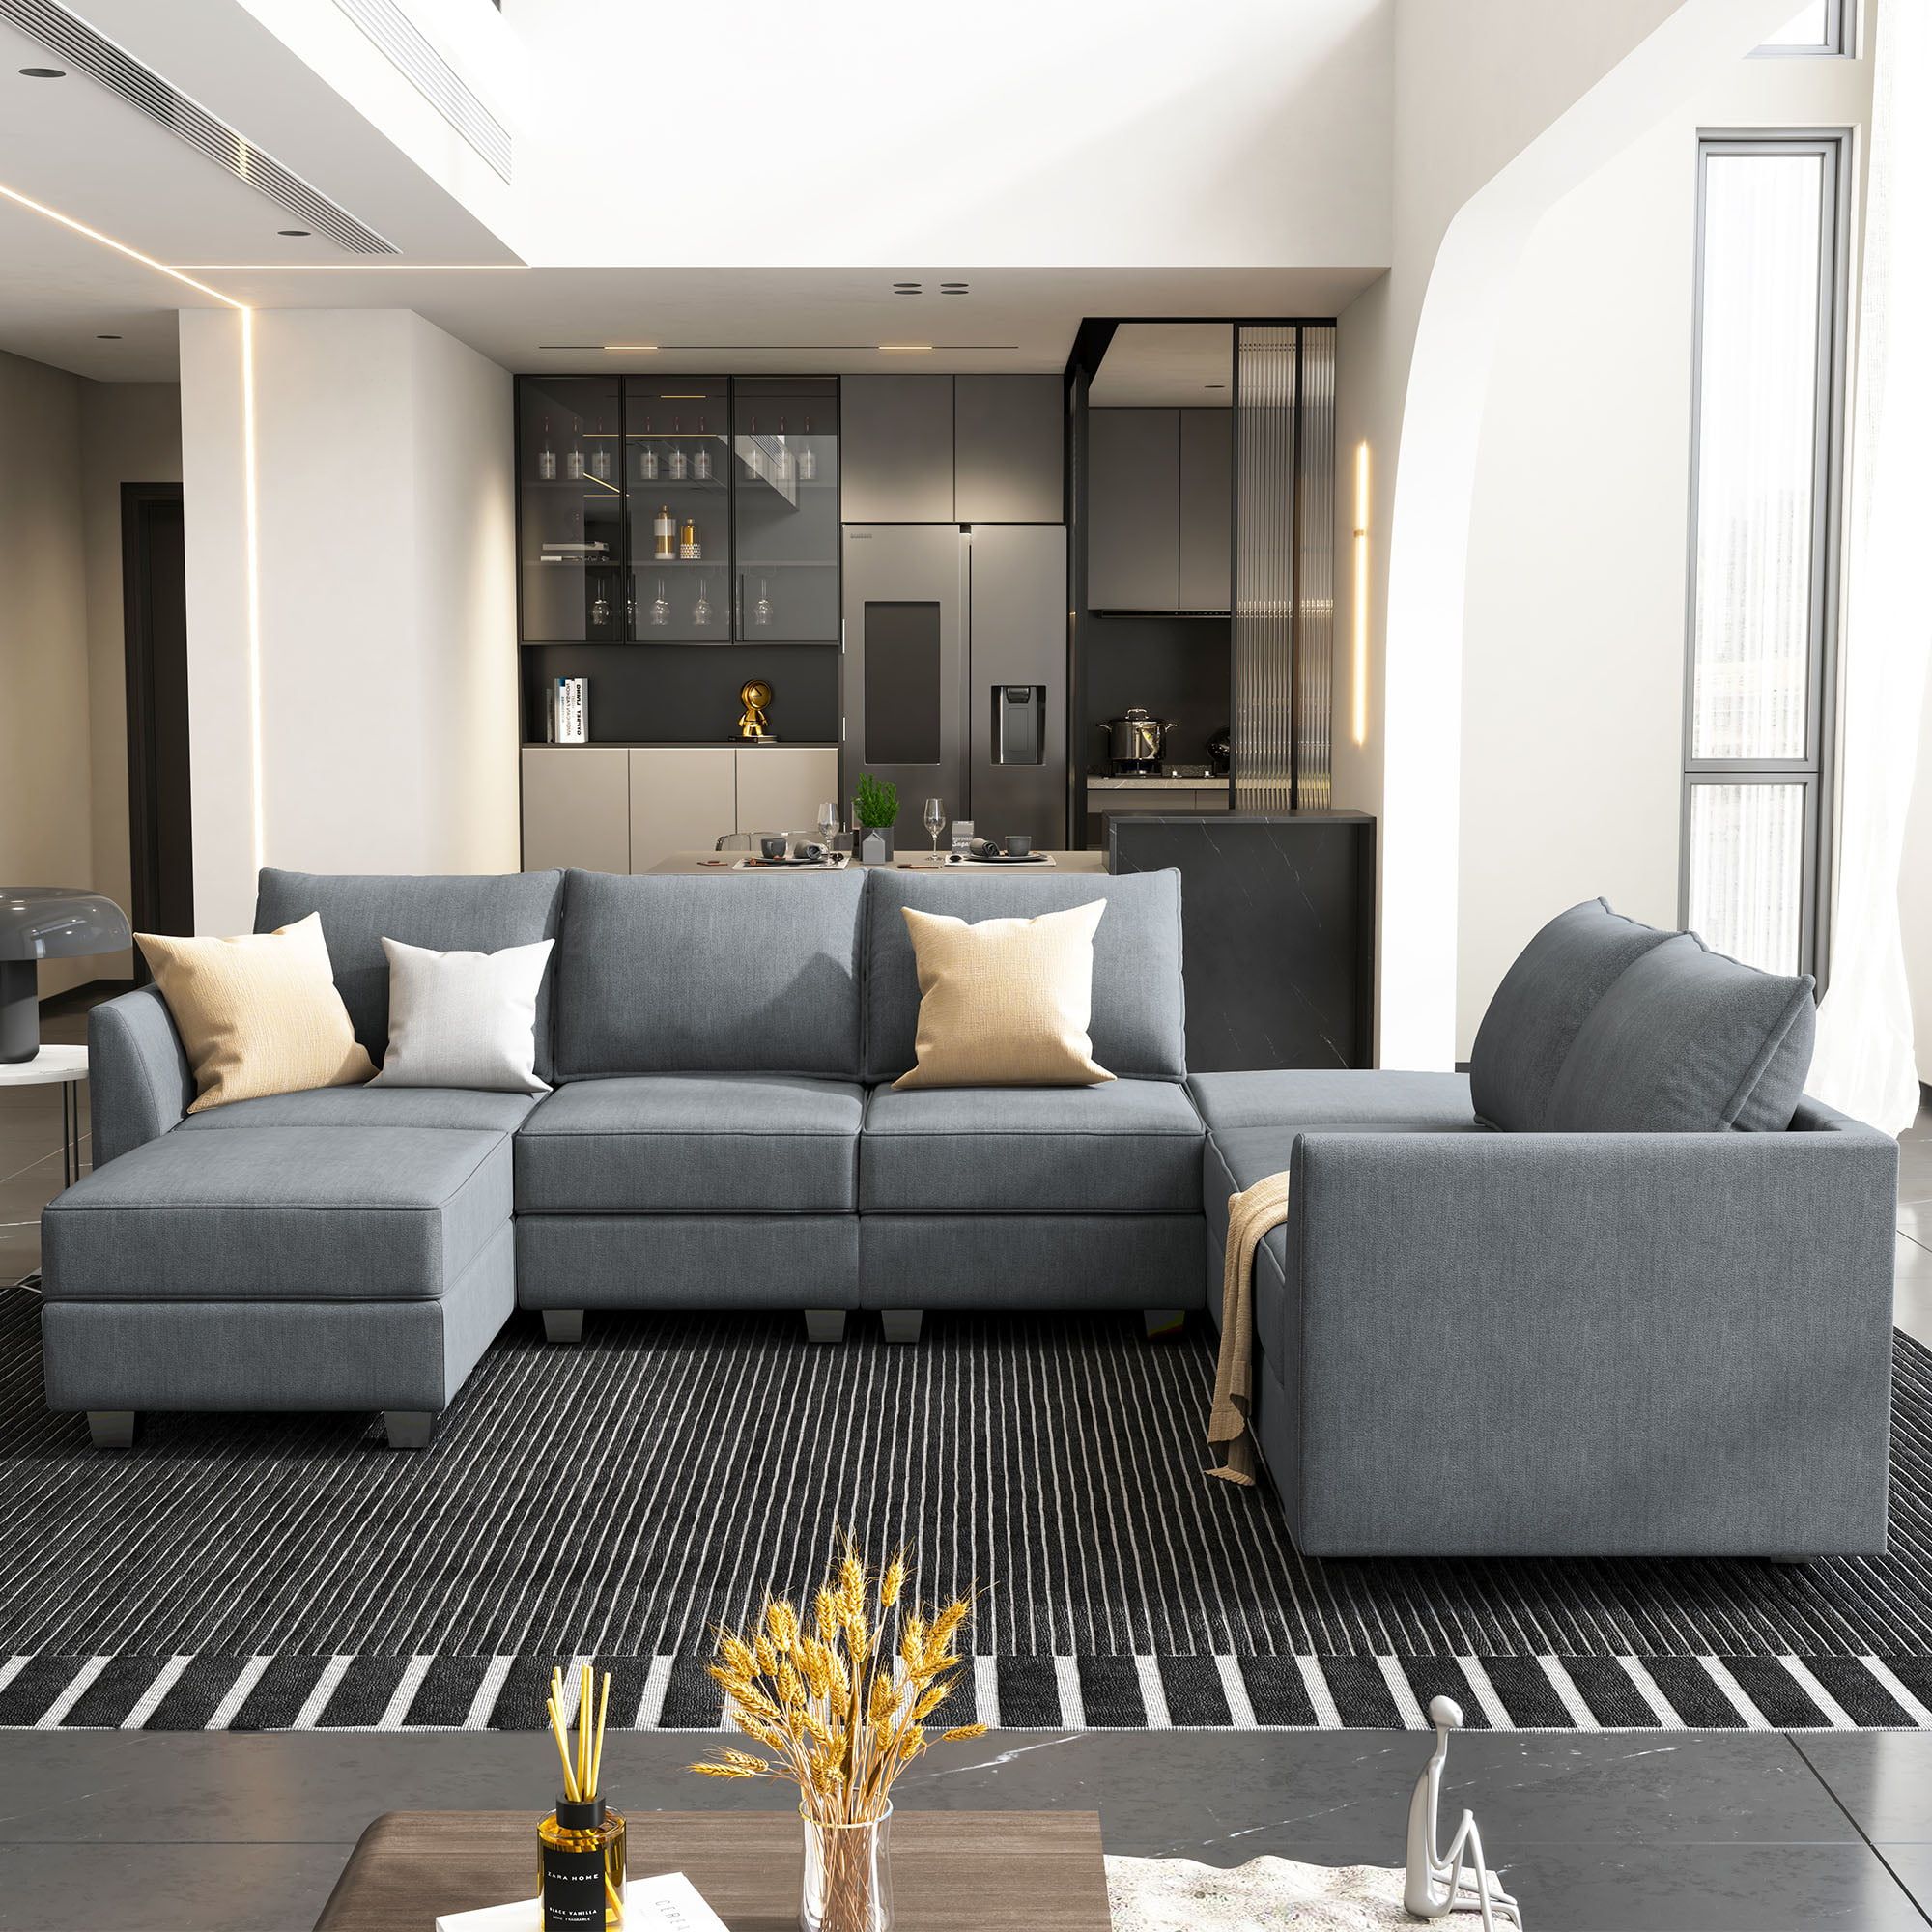 Honbay Modular Sectional Sofa With Reversible Chaises Sofa With Ottomans U  Shaped Sectional Couch For Living Room, Bluish Grey – Walmart Regarding U Shaped Modular Sectional Sofas (View 6 of 20)